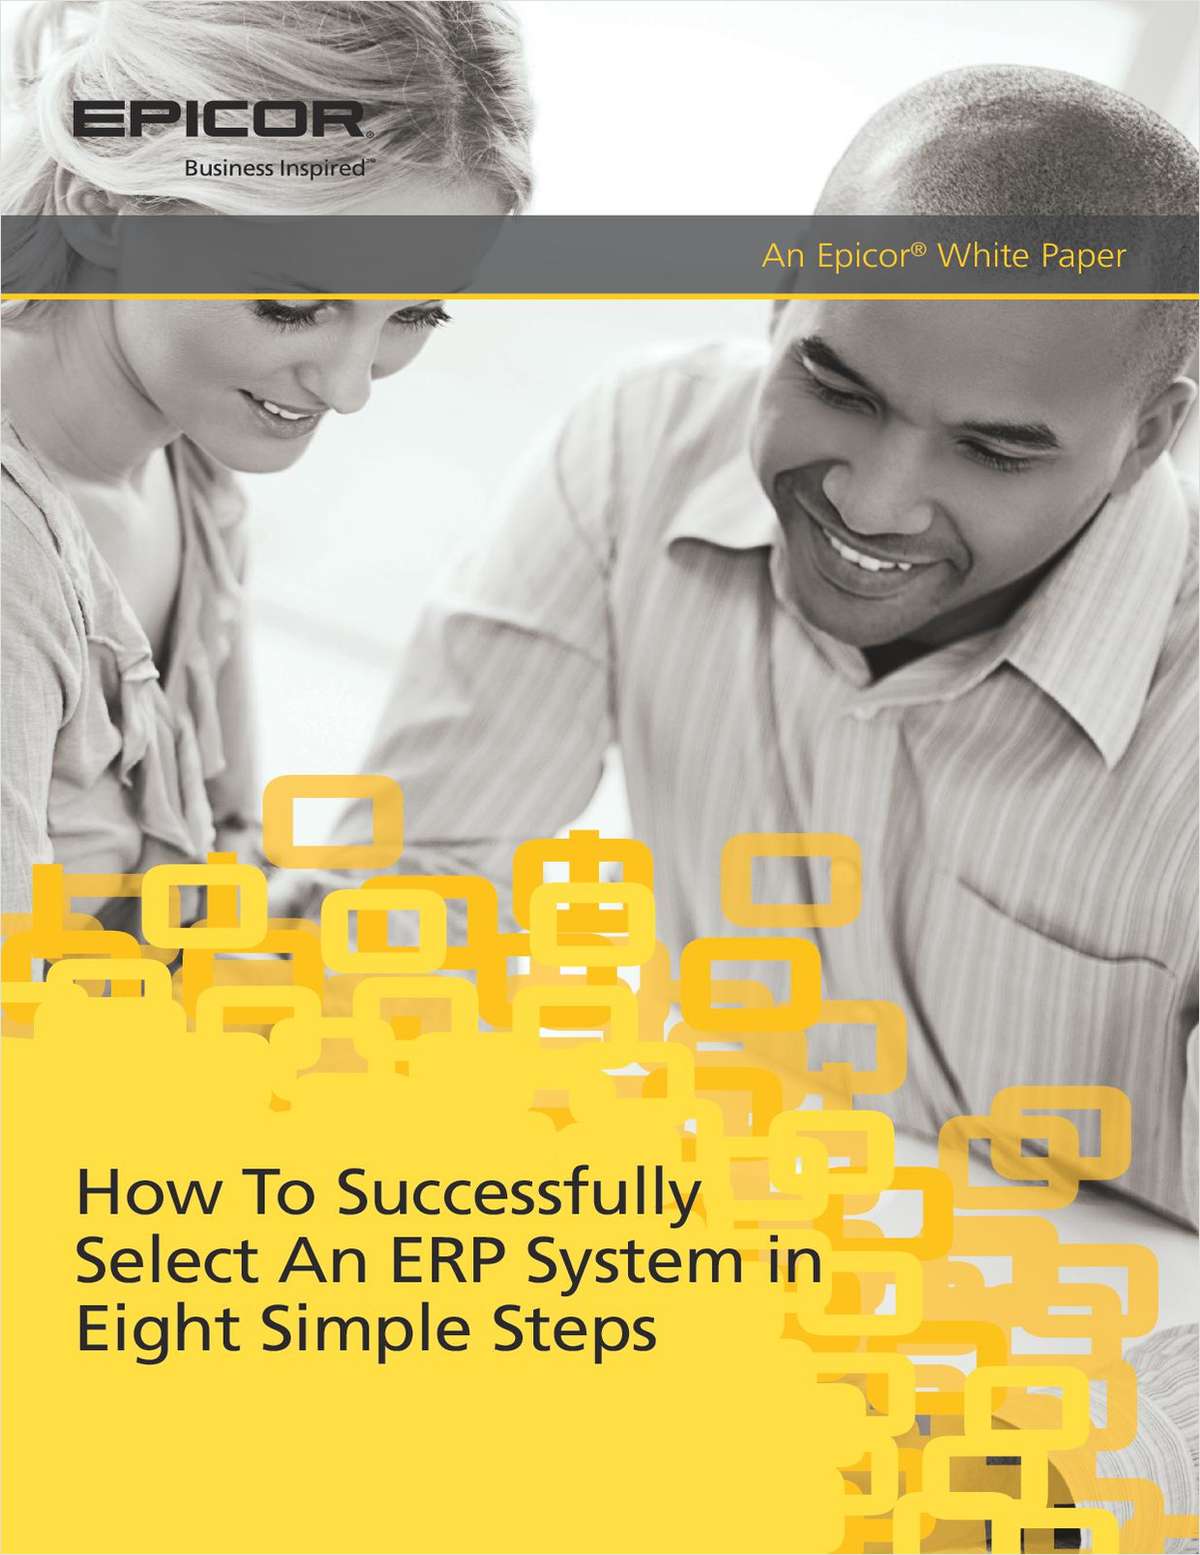 8 Simple Steps to Successfully Select an ERP System